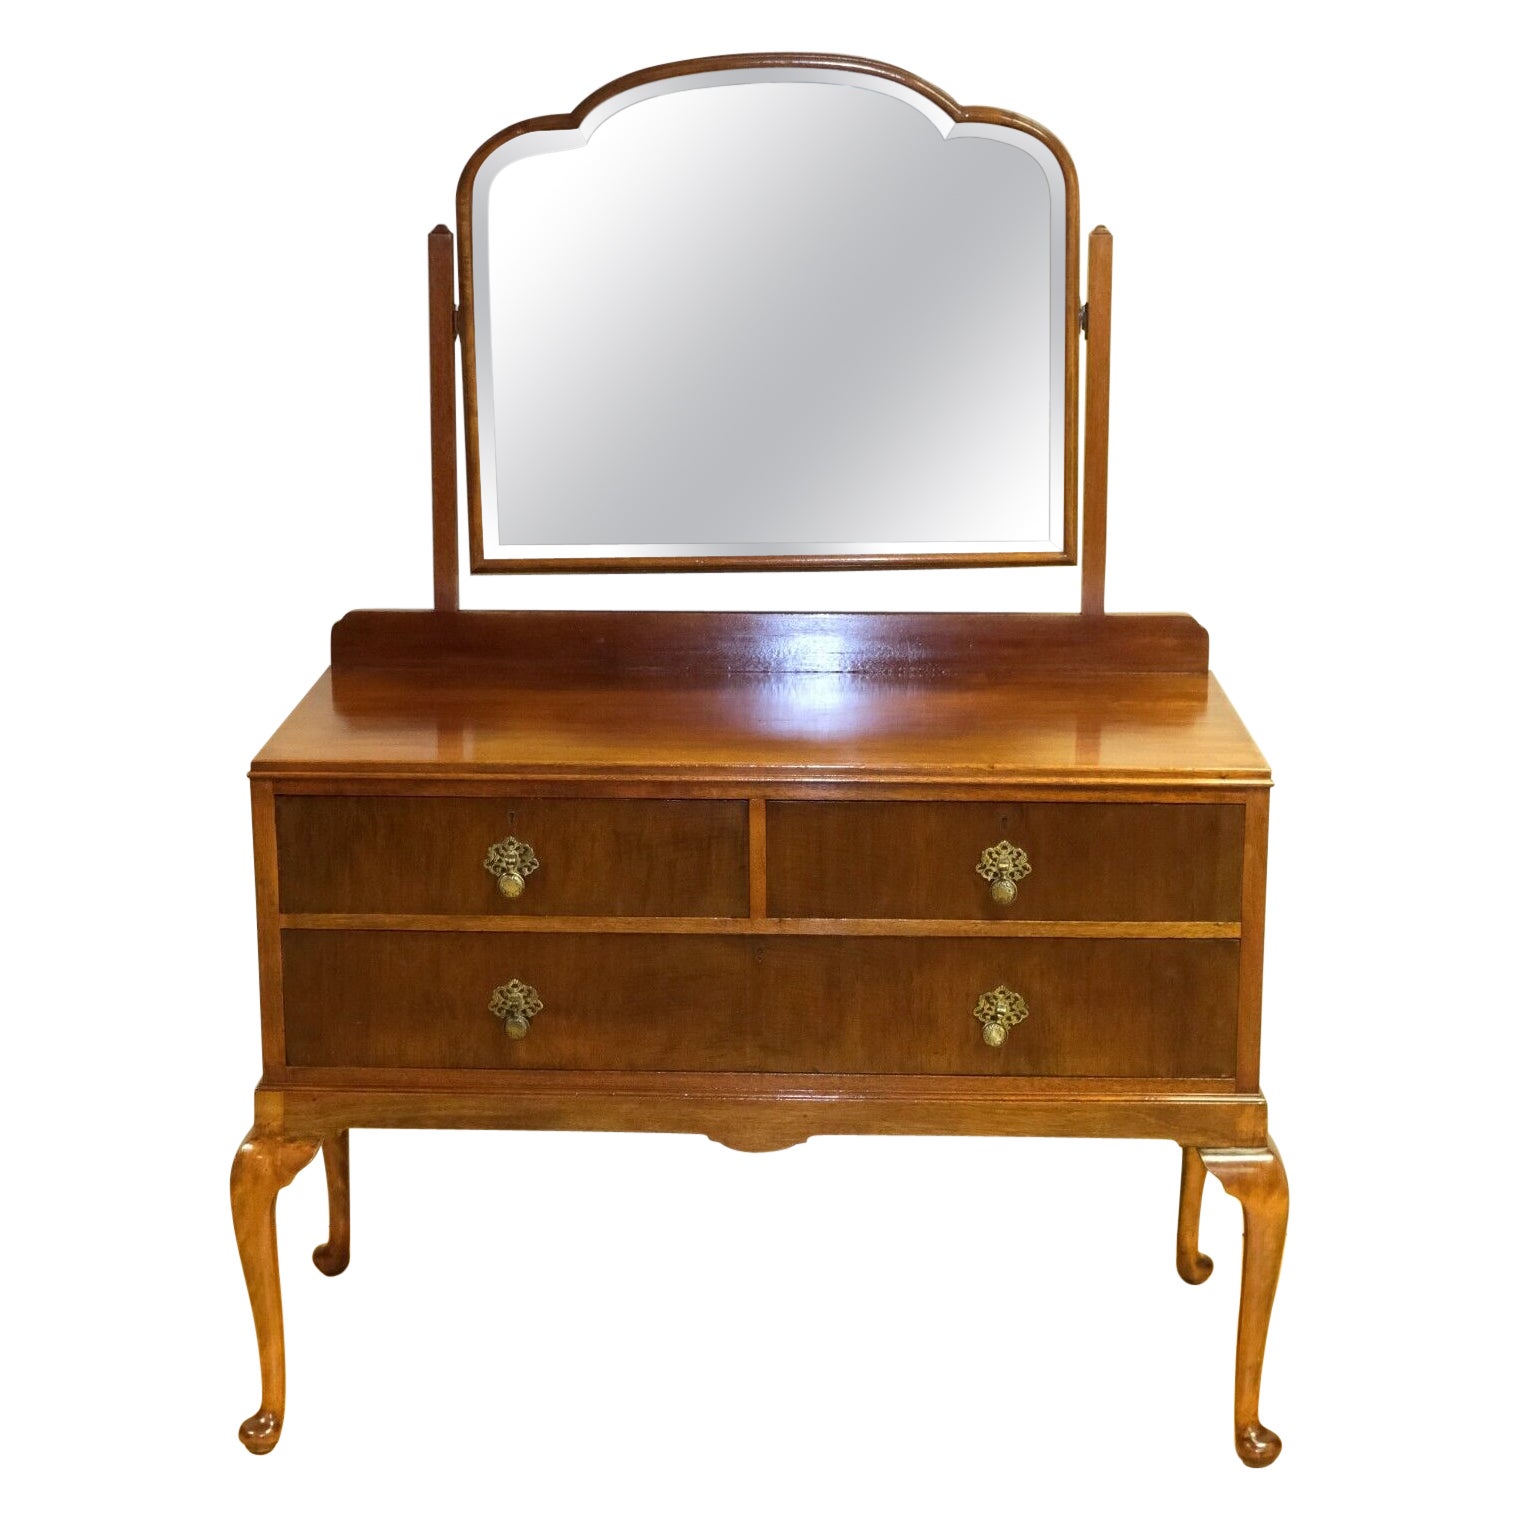 LOVELY EARLY 20TH CENTURY HARDWOOD DRESSiNG TABLE RAISED ON CABRIOLE LEGS